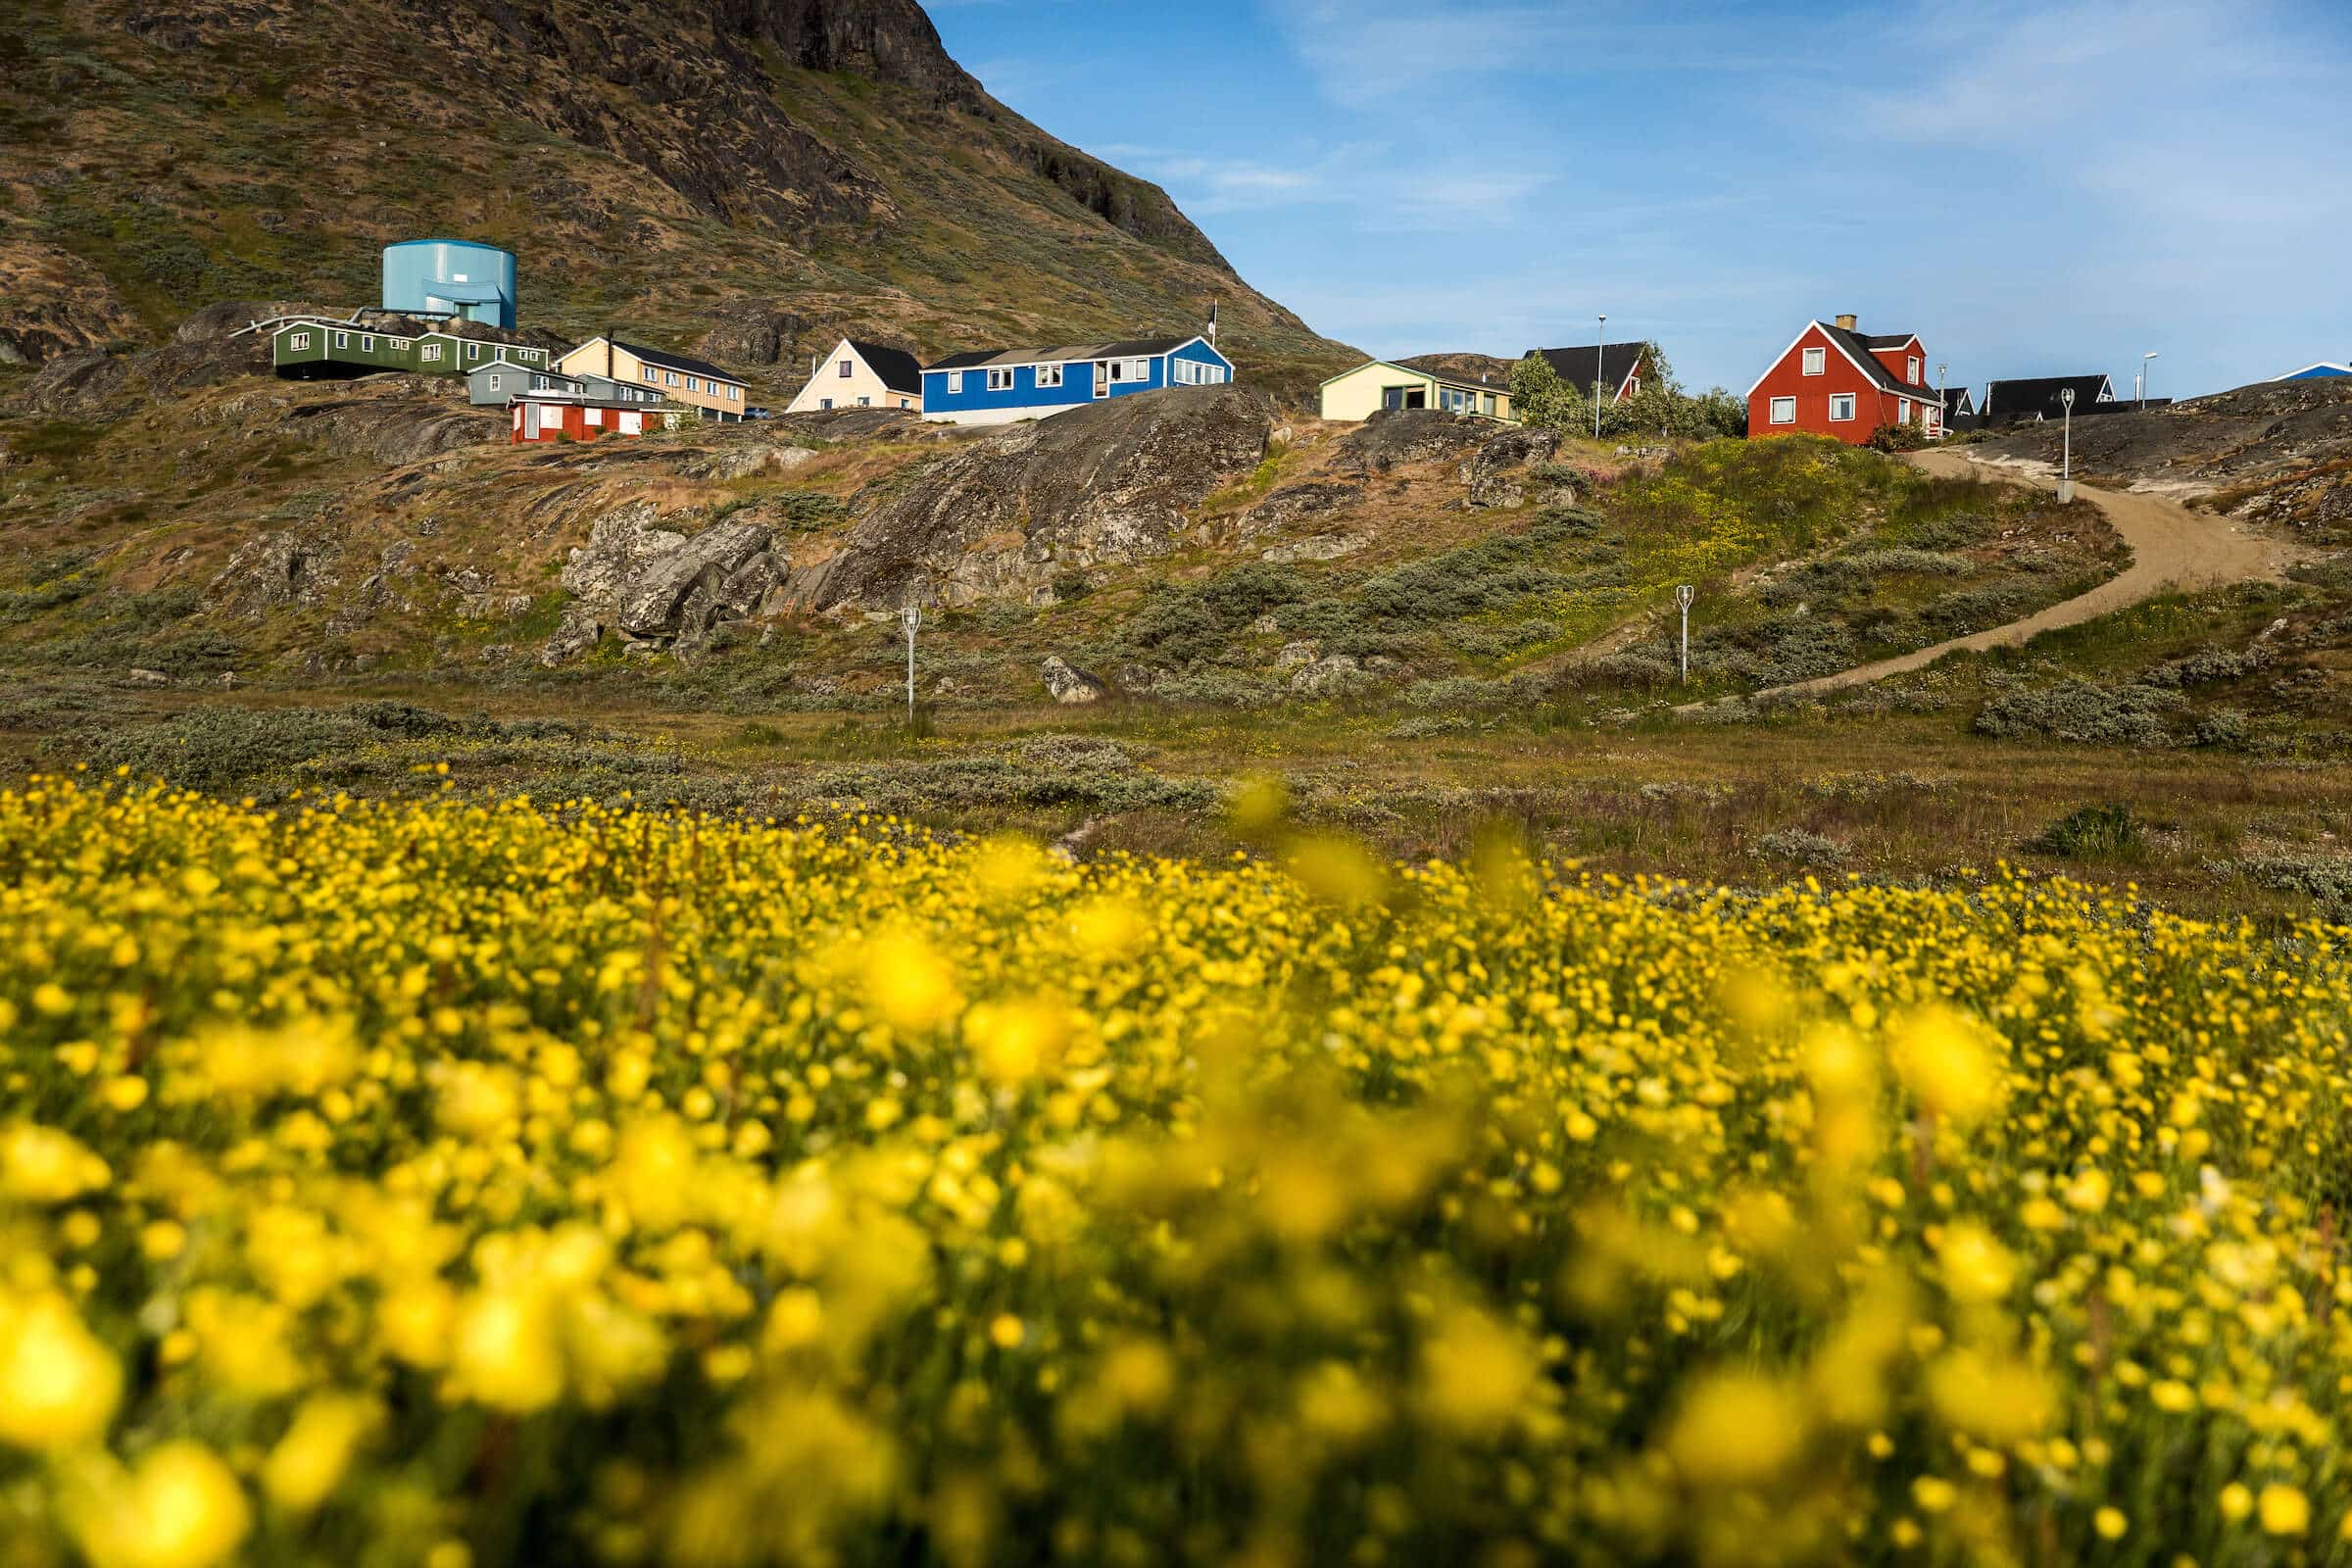 A field of flowers in Narsaq in South Greenland. Photo by Mads Pihl.